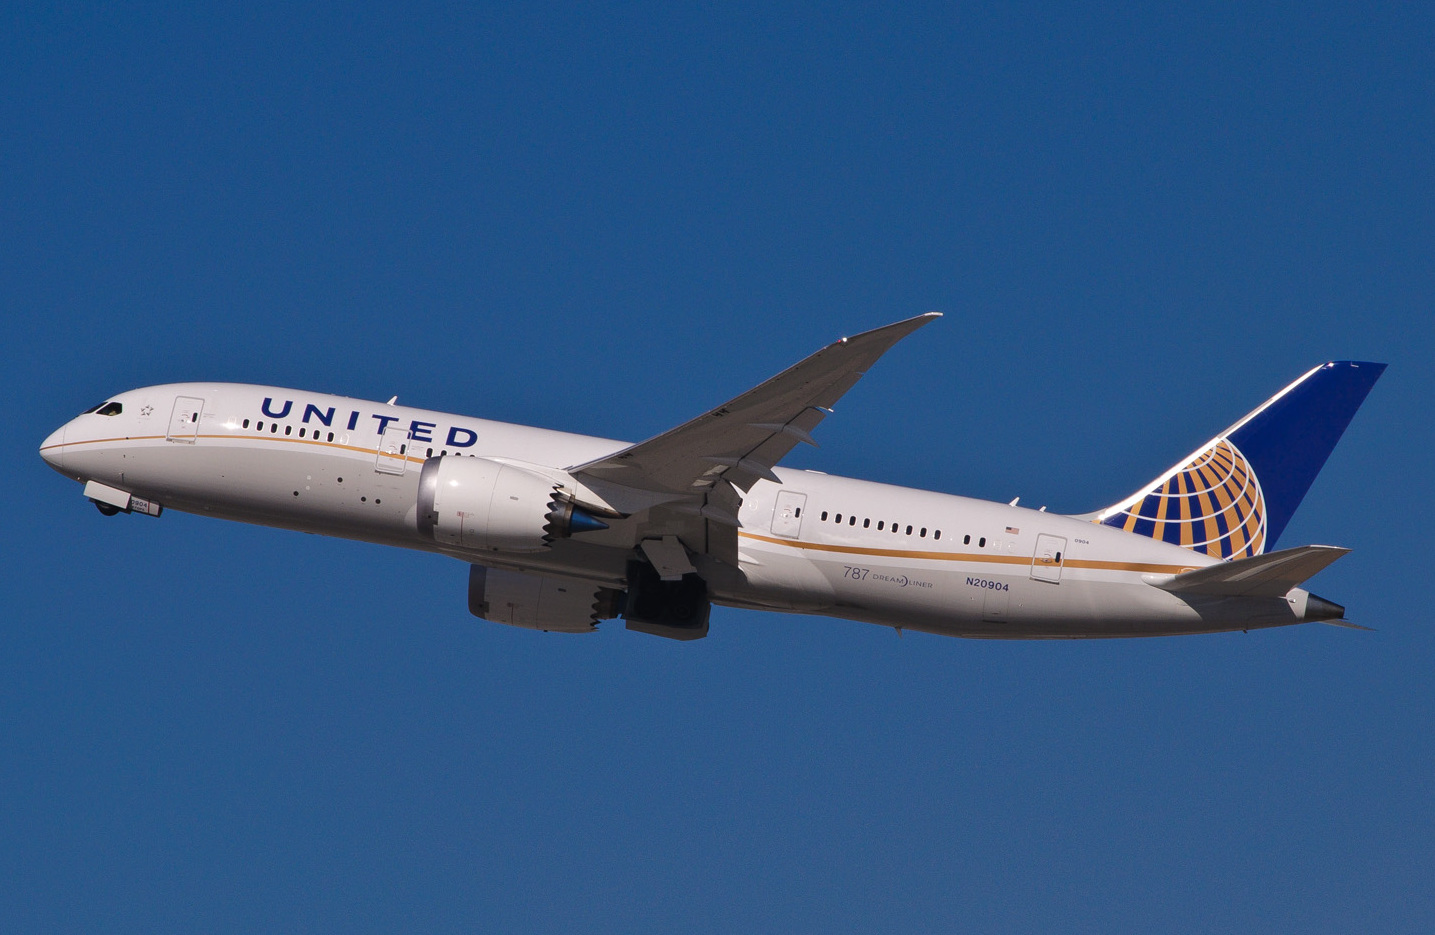 United Airlines Holdings Inc. (NASDAQ:UAL) Turns To Cost Cuts After Consecutive Quarterly Loss